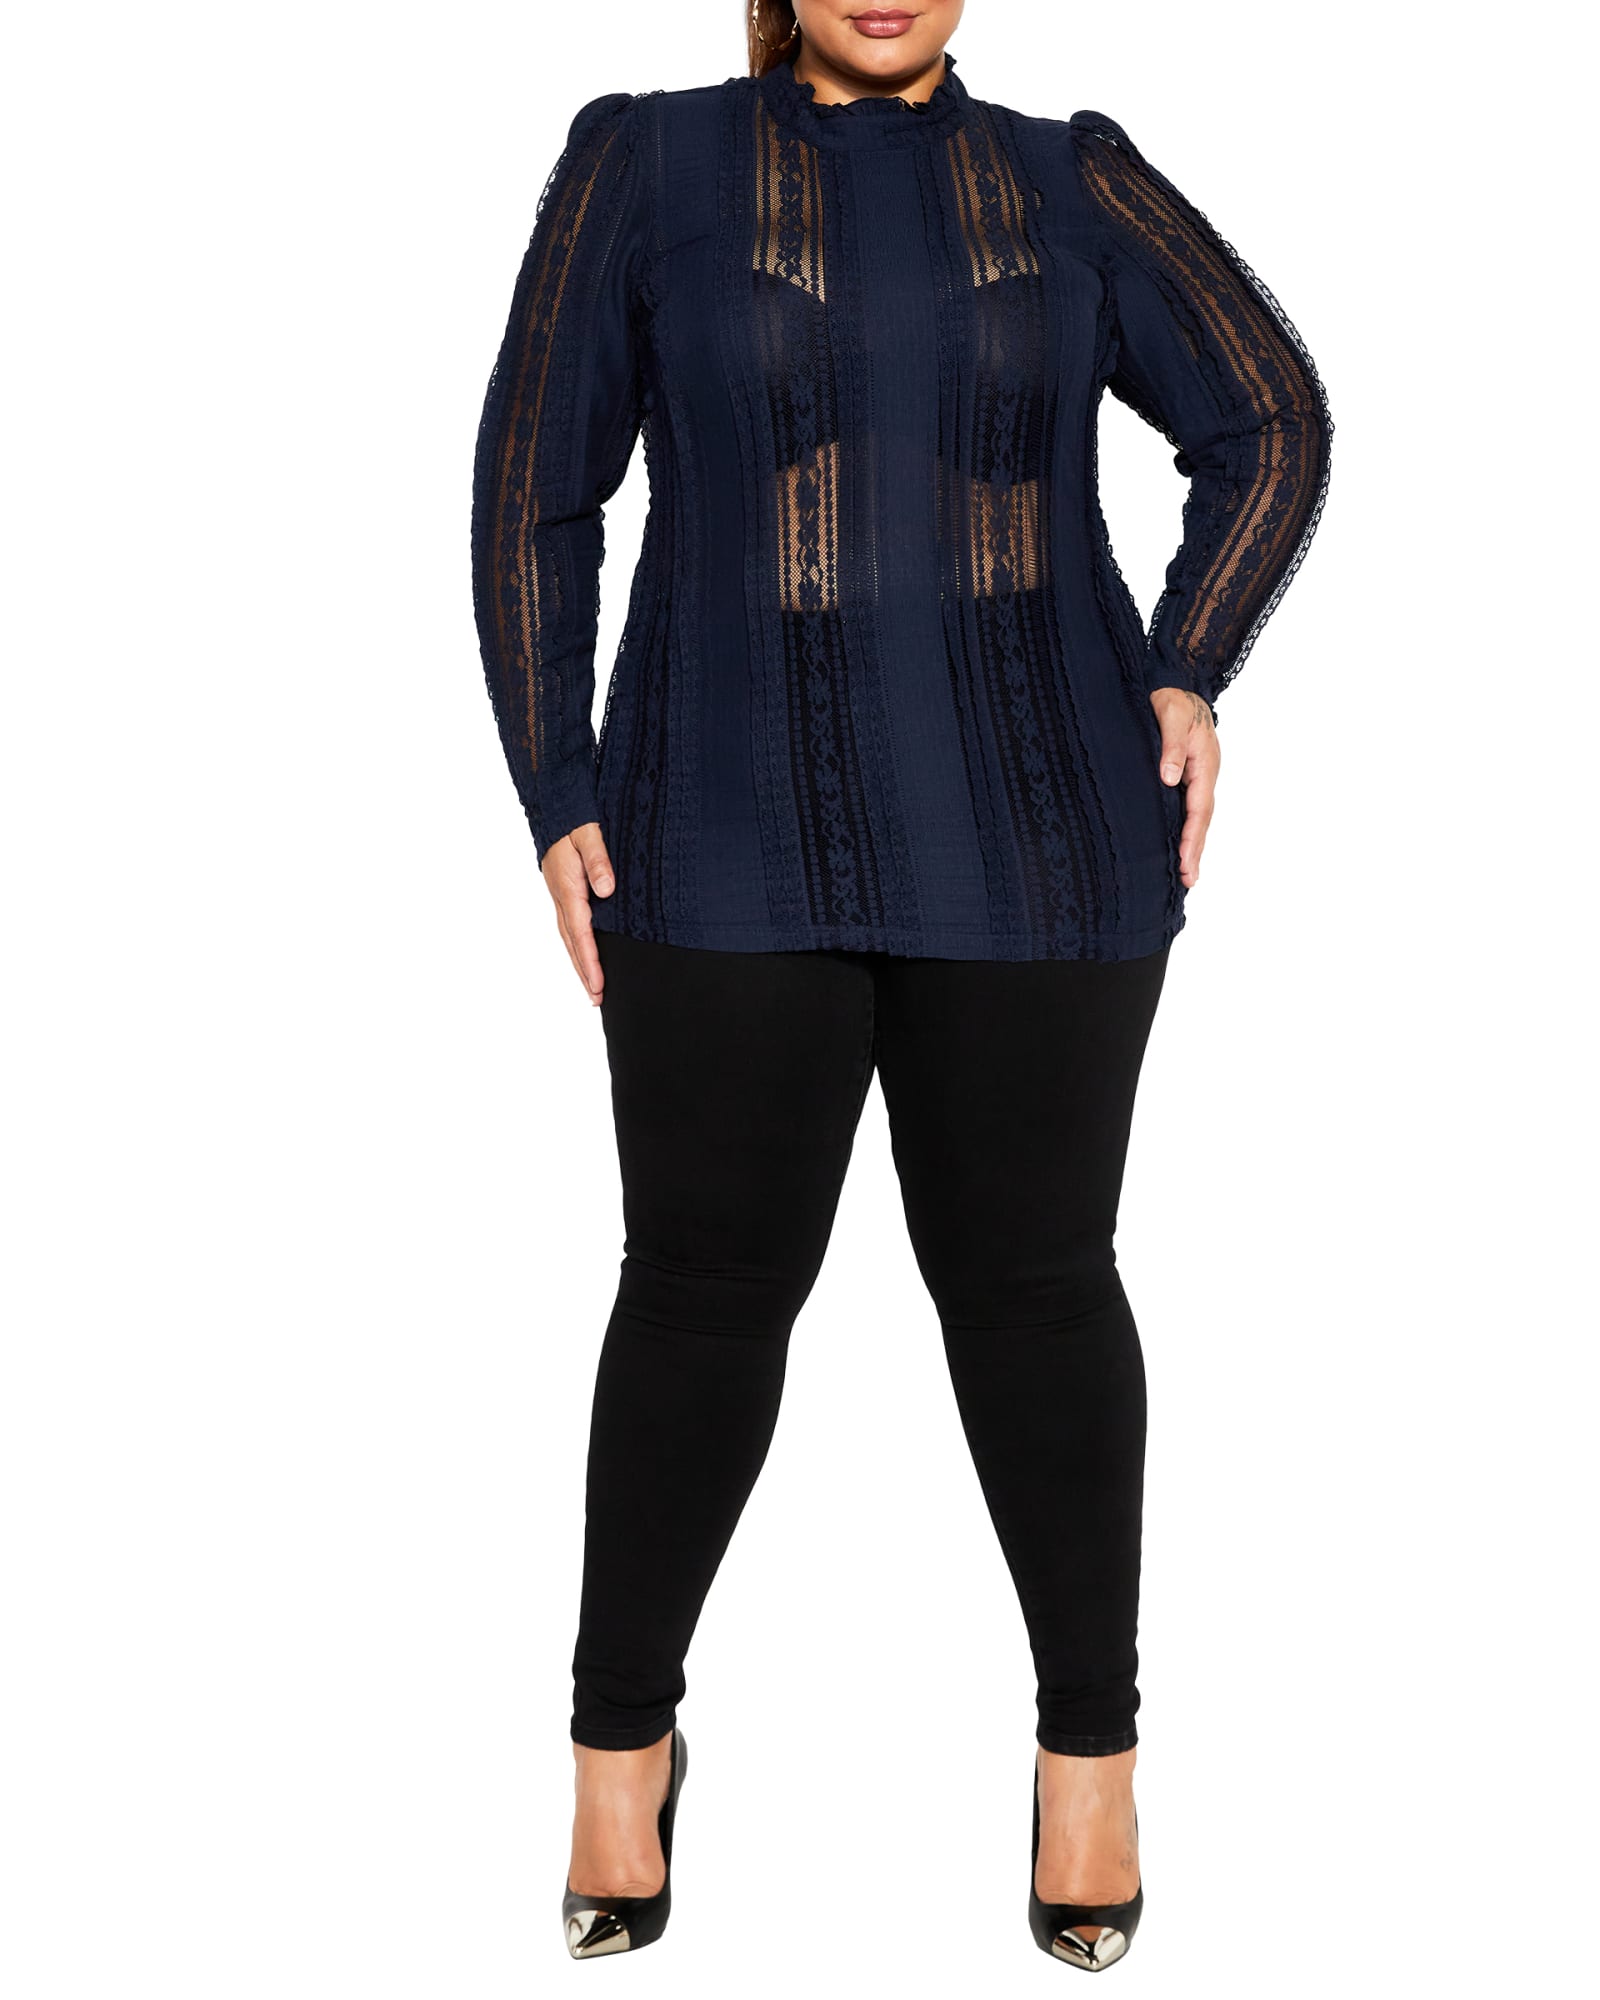 Lace Sleeve Top For Curvy Girl